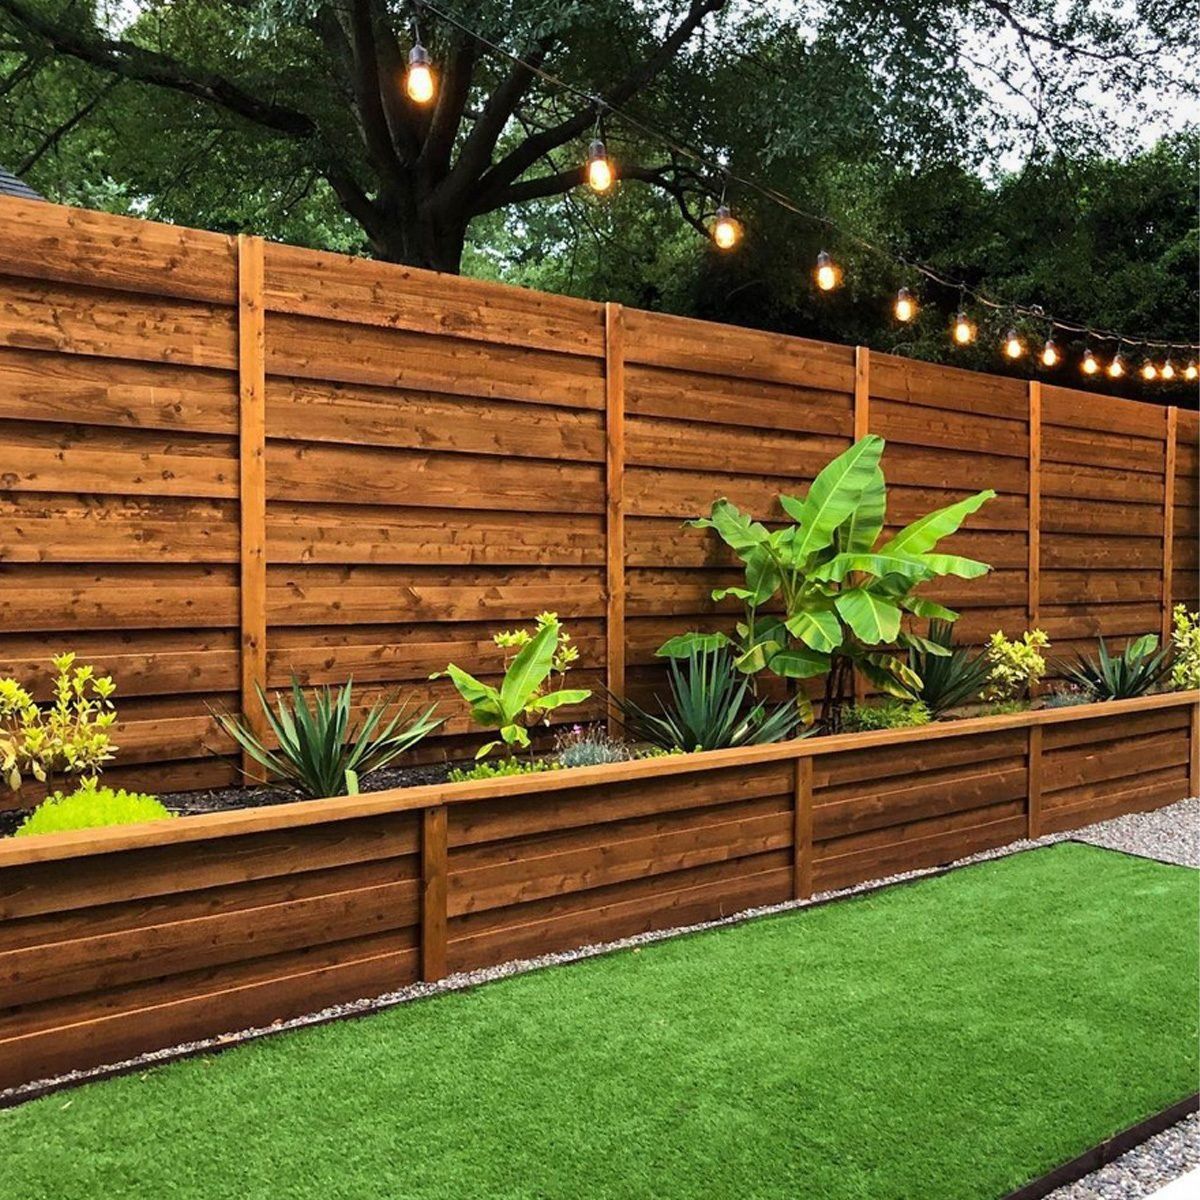 Timeless And Cozy Garden Fences